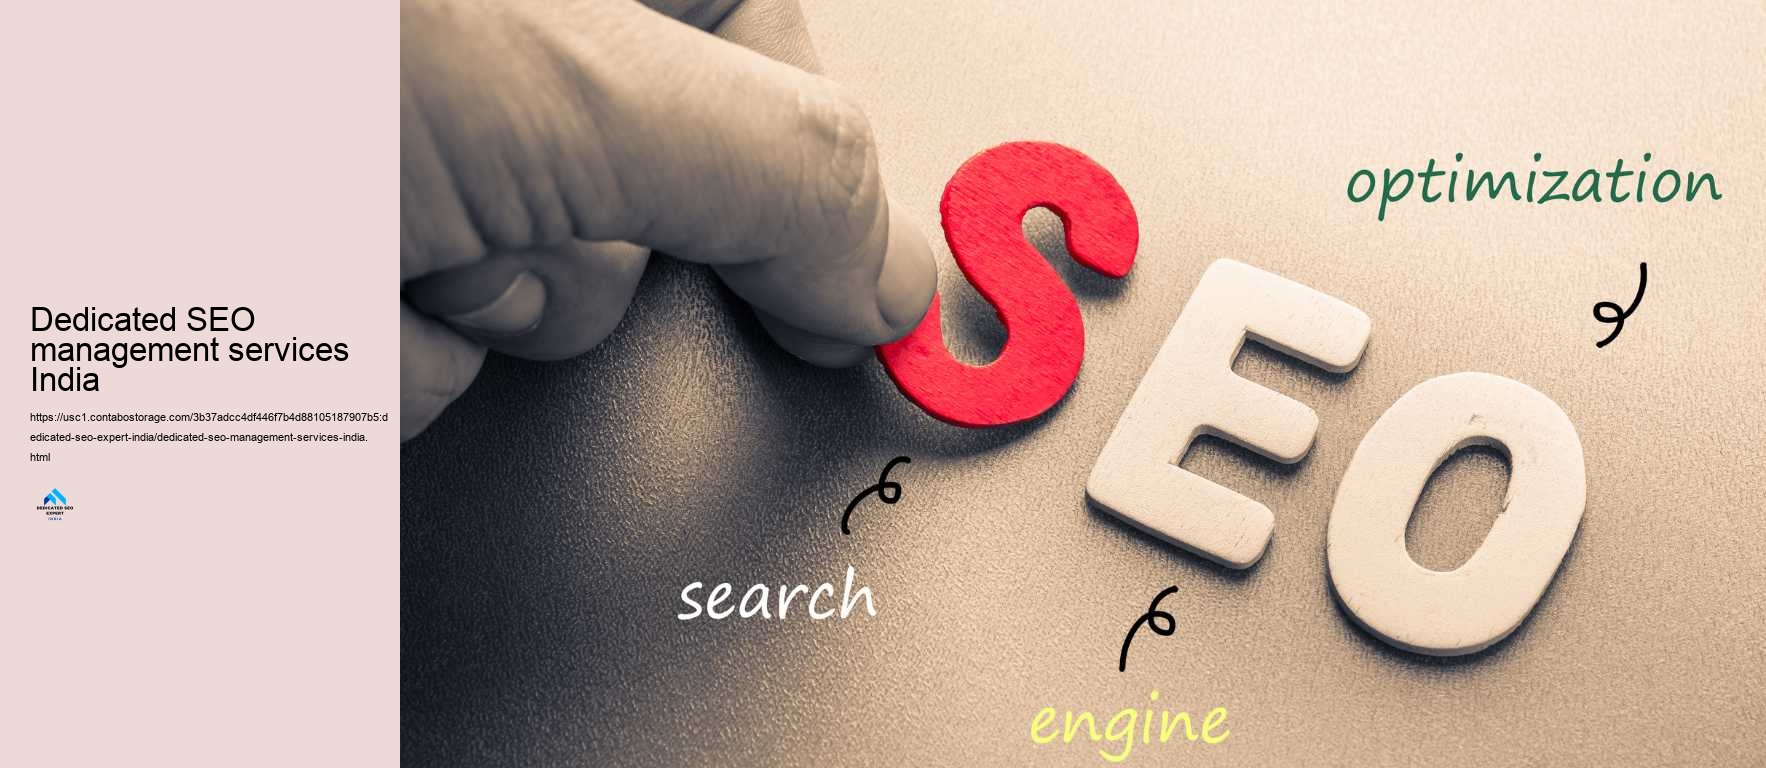 Dedicated SEO management services India